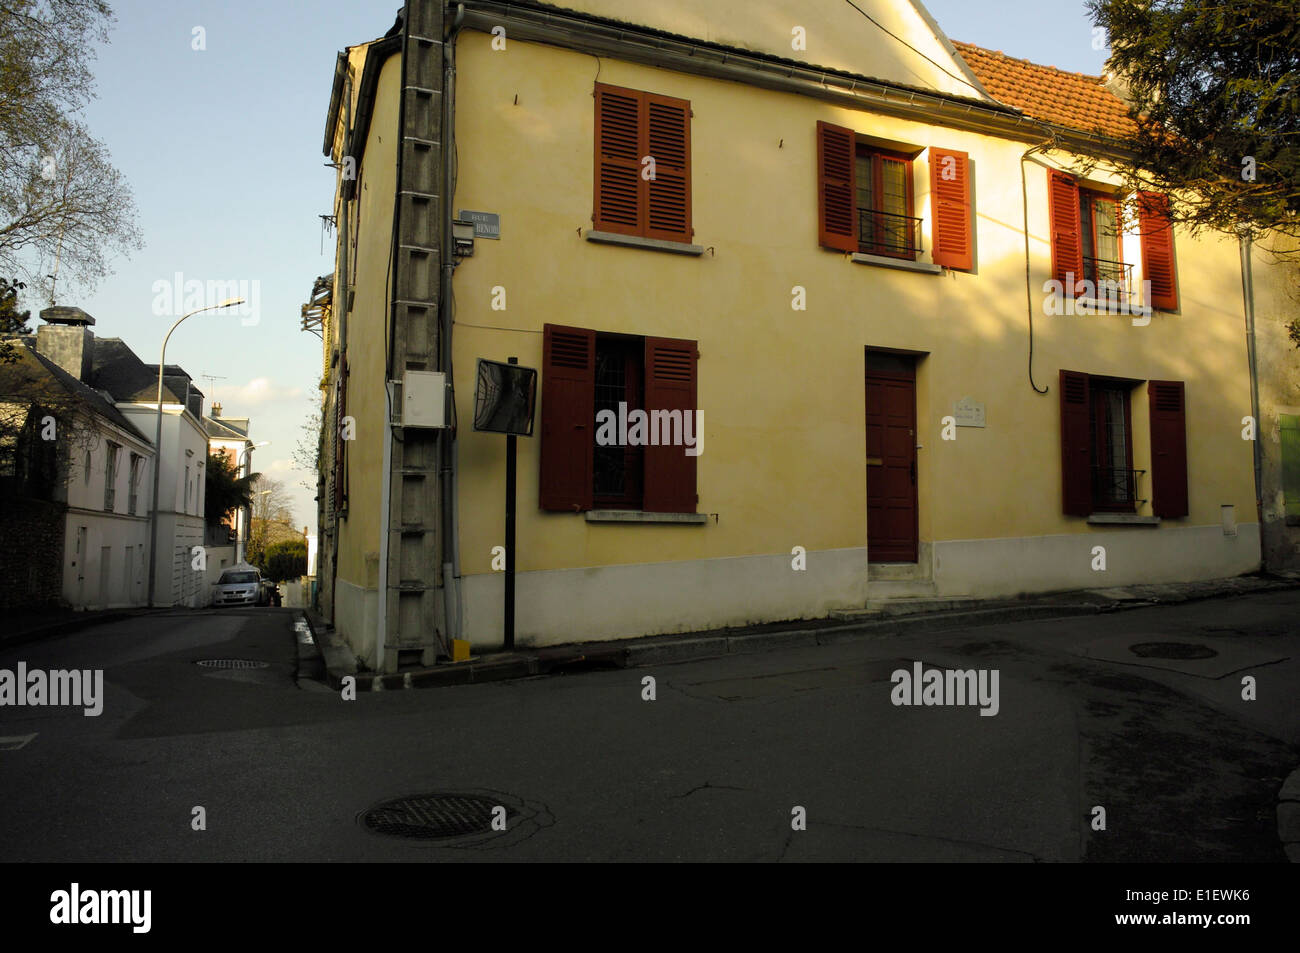 AJAXNETPHOTO - LOUVECIENNES,FRANCE. STREET IN THE VILLAGE NAME AFTER THE ARTIST PIERRE AUGUSTE RENOIR 1841 - 1919 ON THE CORNER OF RUE DES MONTBUISSON. THE YELLOW BUILDING WAS USED AS A STUDIO BY THE PAINTER.  PHOTO:JONATHAN EASTLAND/AJAX  REF:DP181604 201 Stock Photo